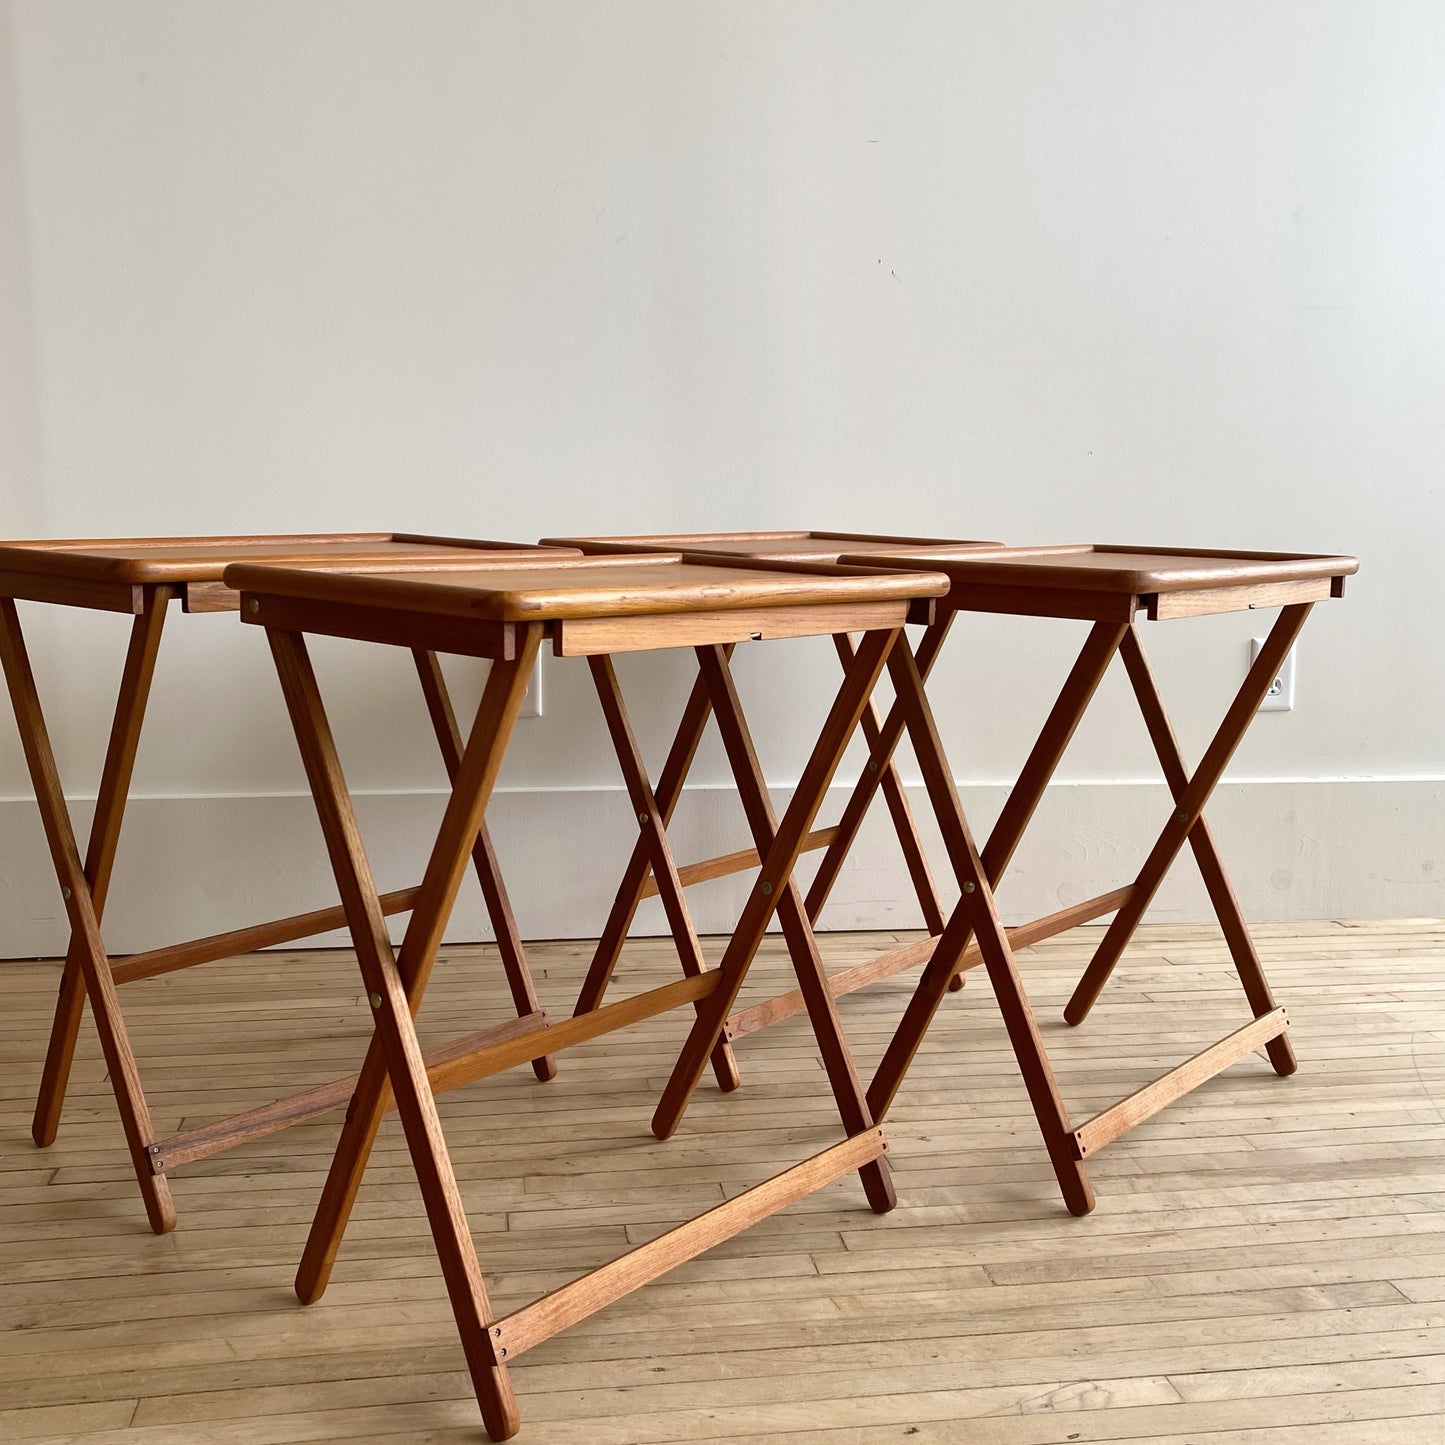 Set of 4 Vintage Teak Folding Trays with Stand